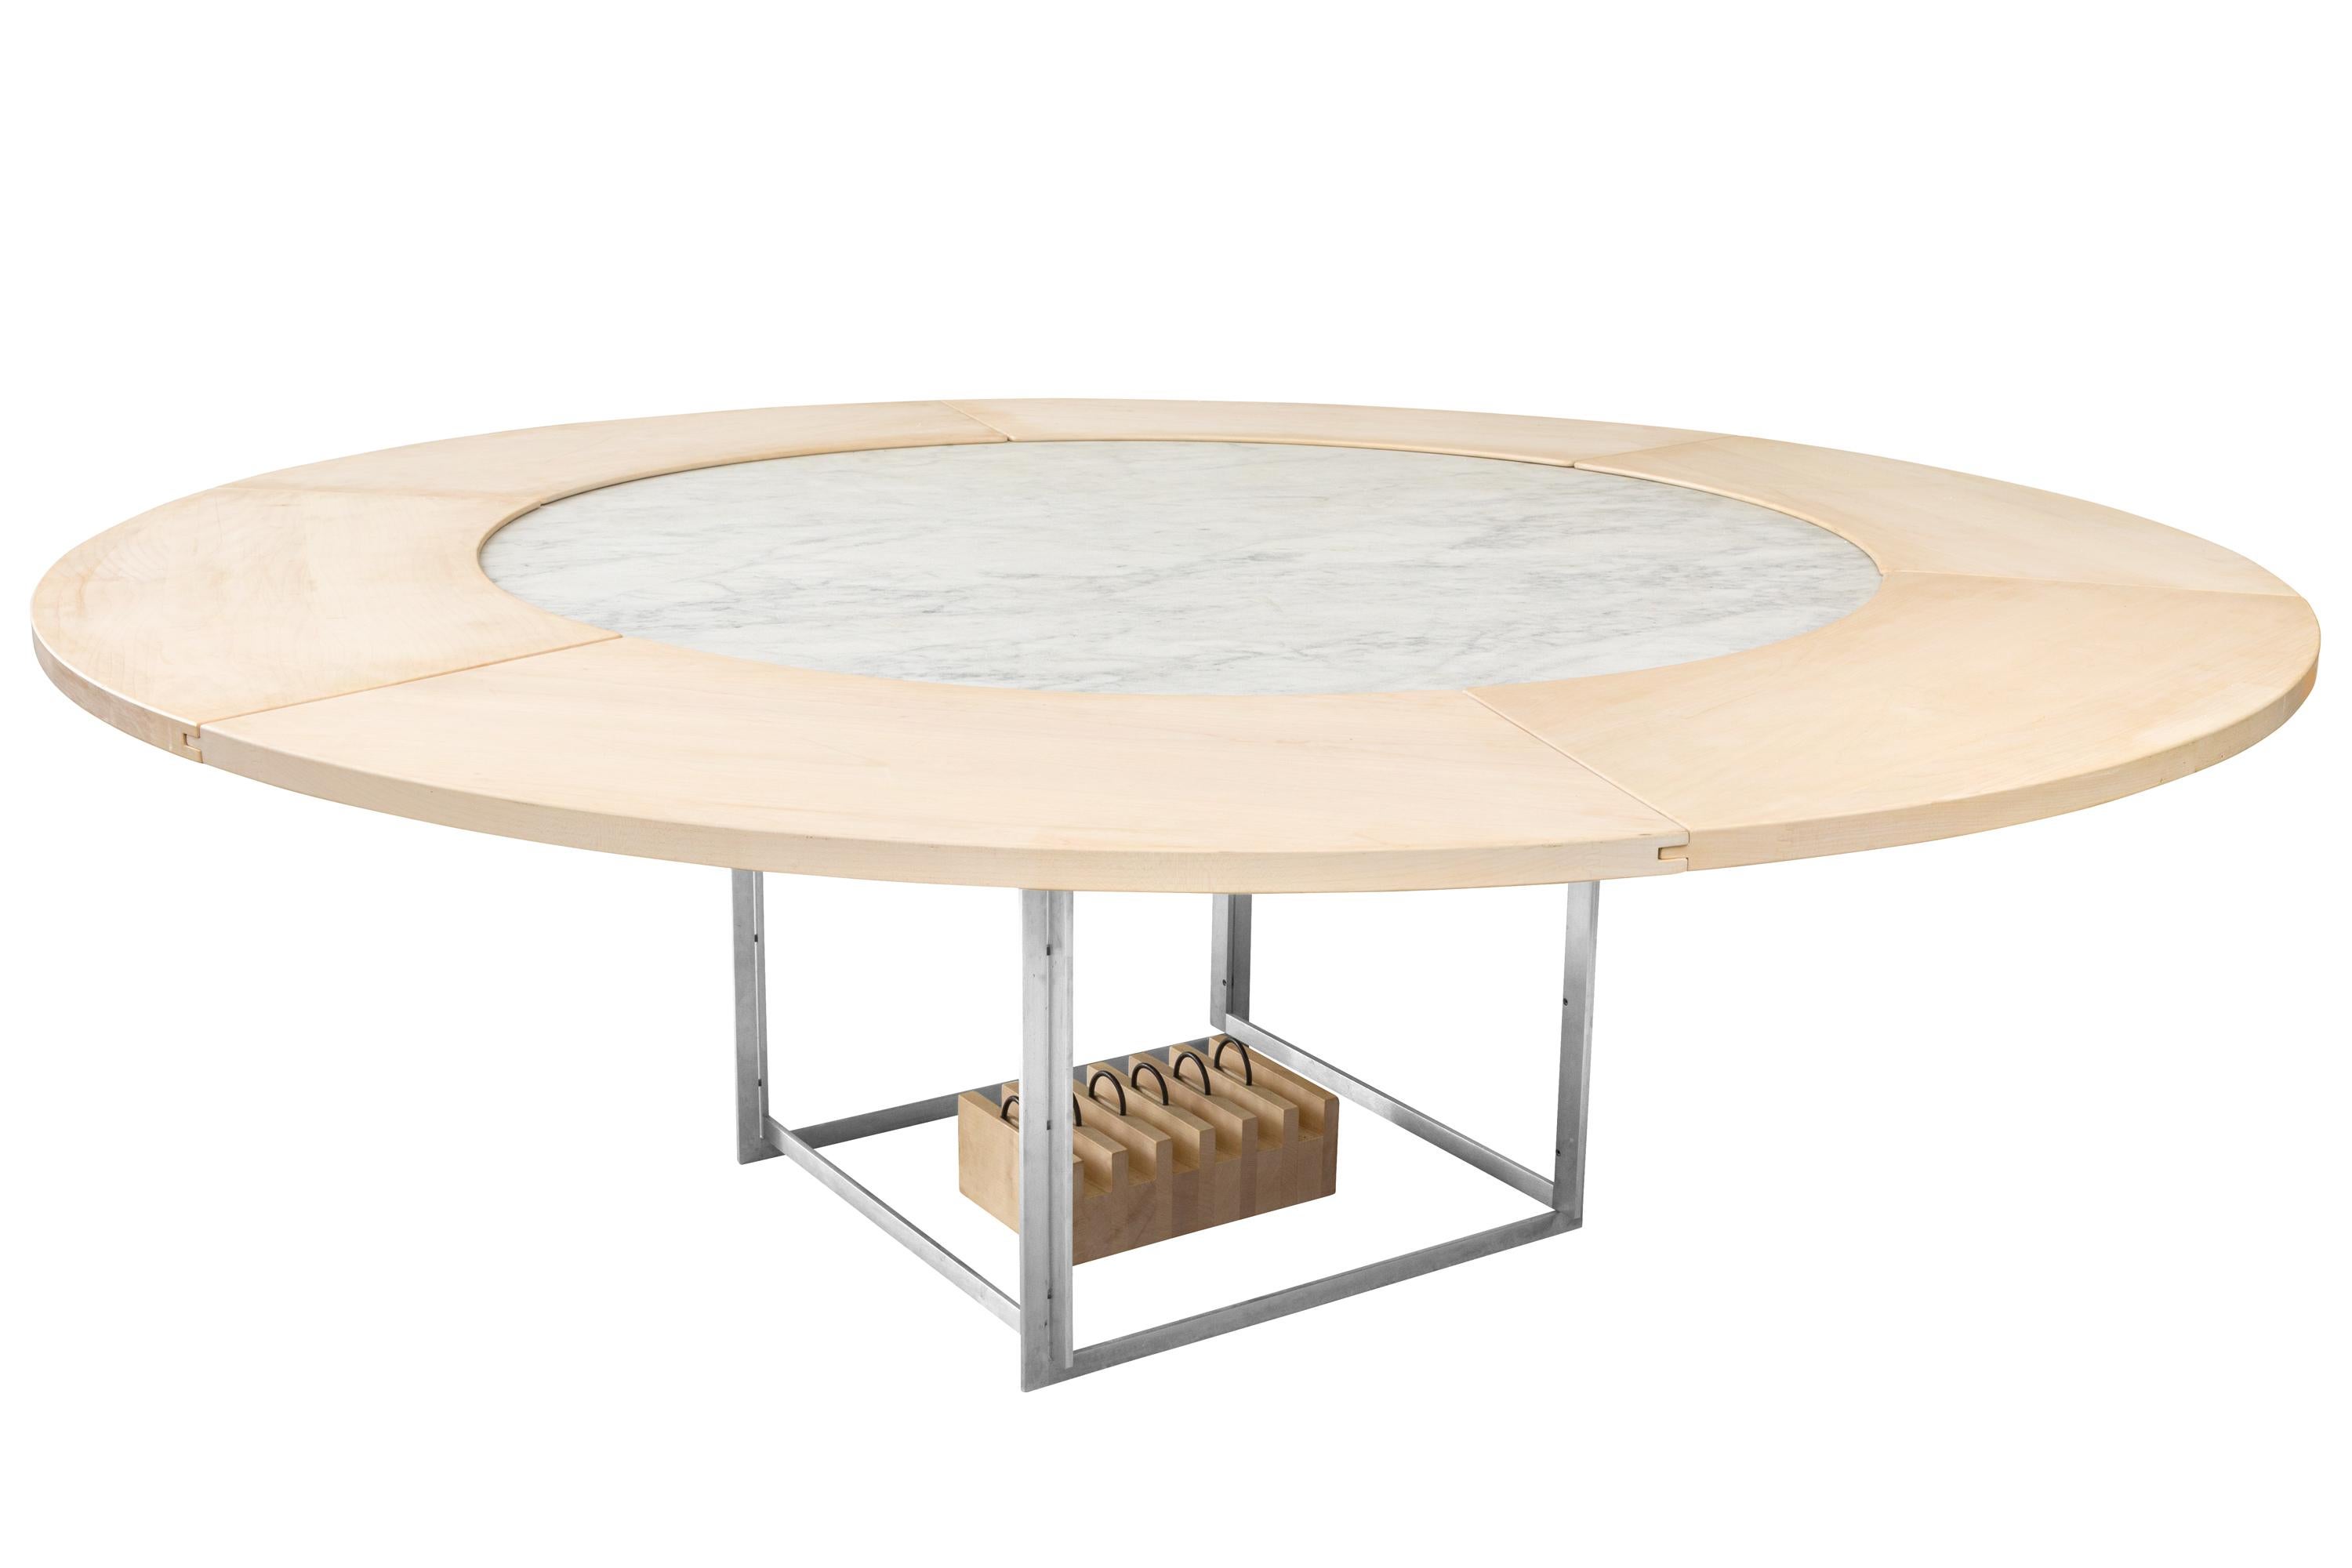 Danish Poul Kjaerholm PK 54 Marble Dining Table with Maple Extensions for Fritz Hansen